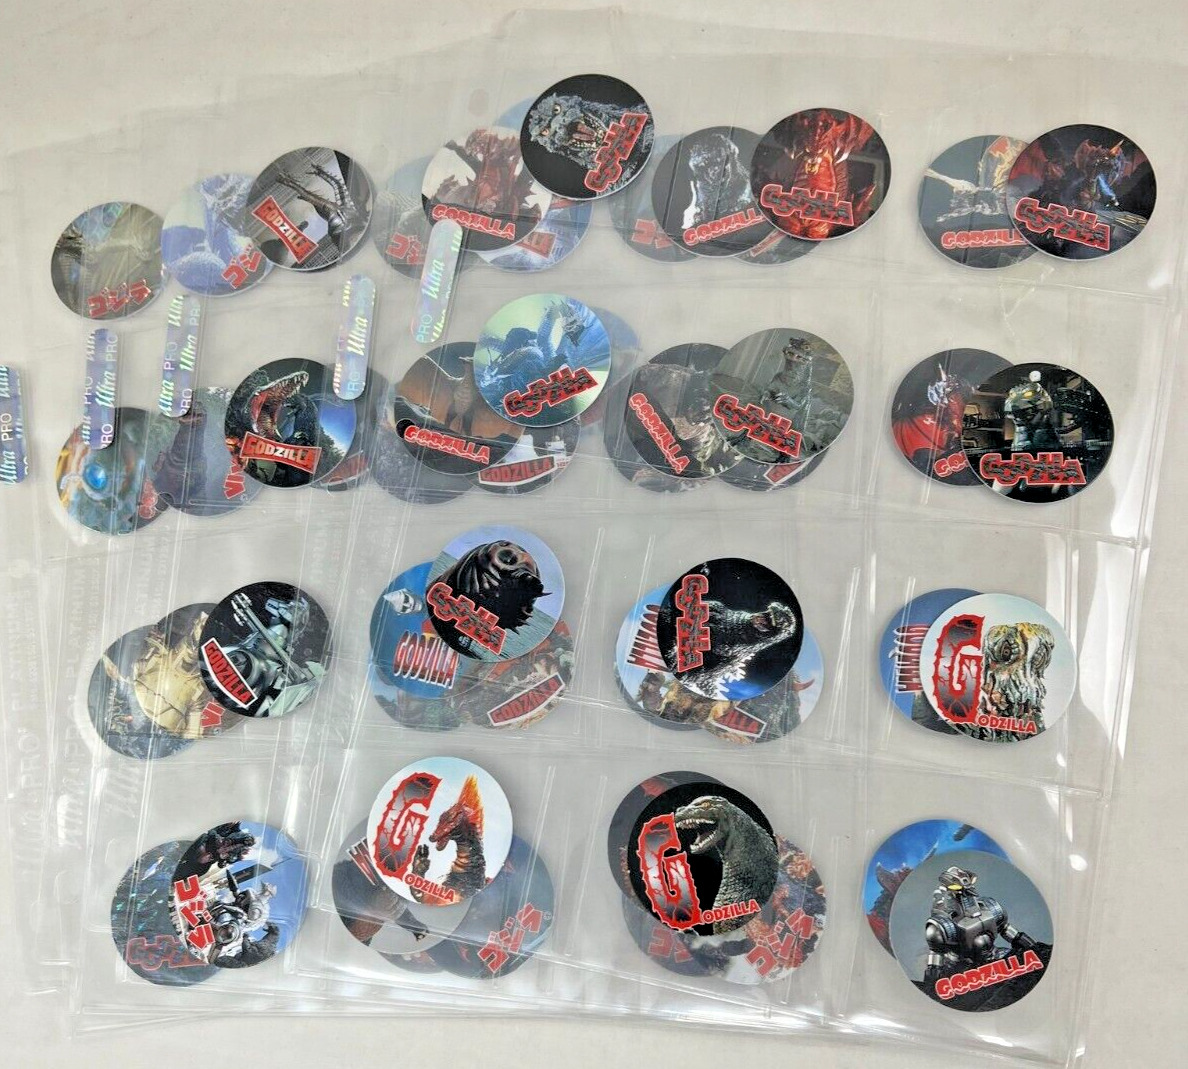 GODZILLA POGS from JAPAN 1995 Complete Set of 55 Some are Prism